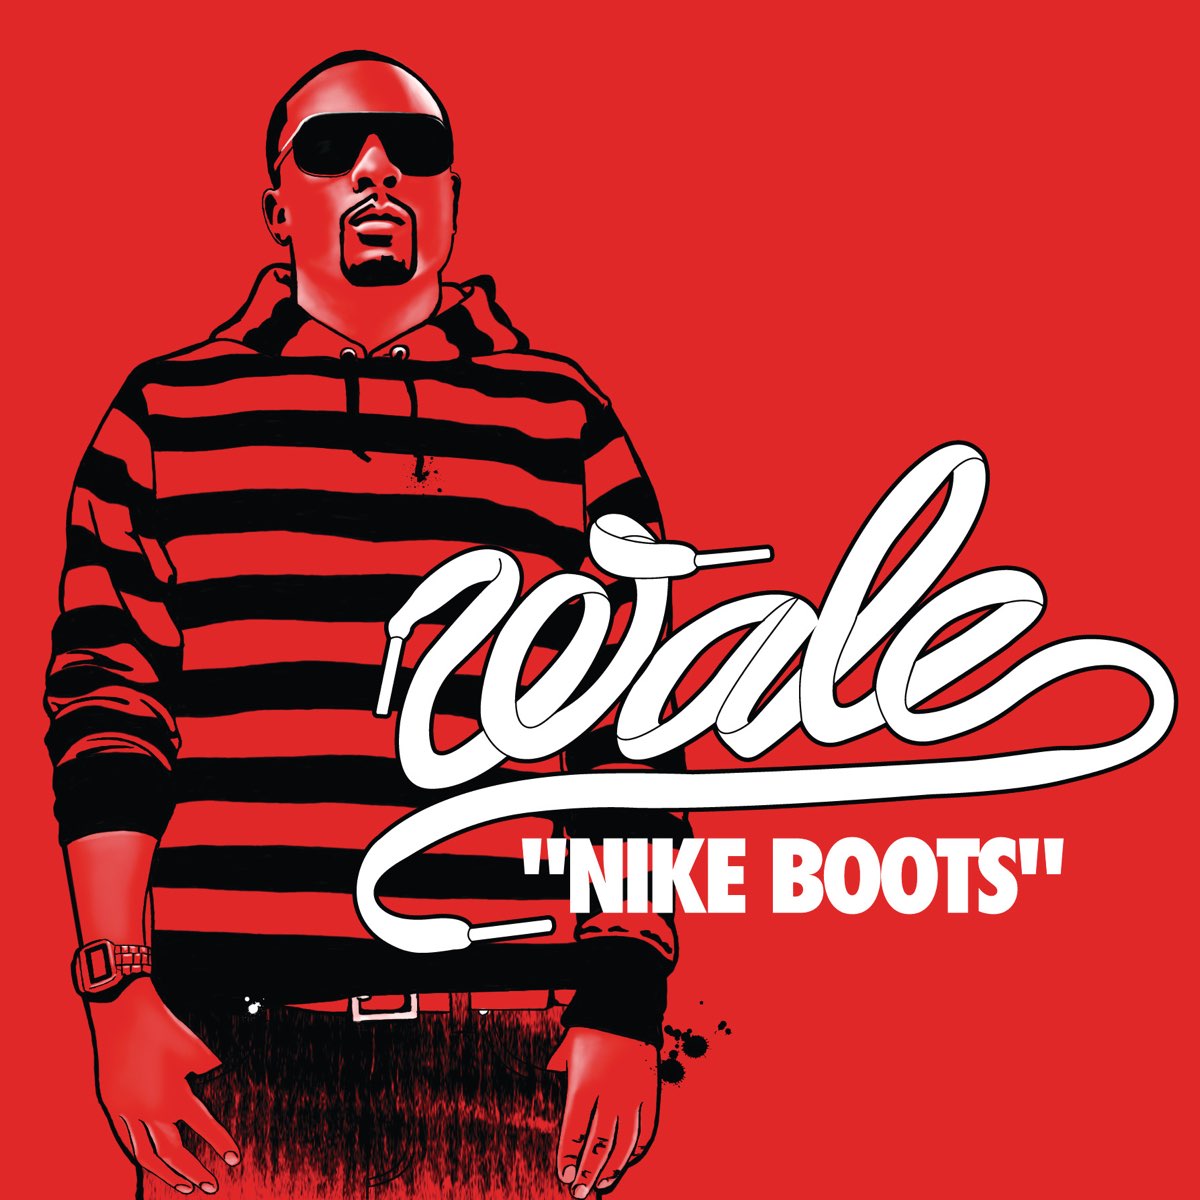 Nike Boots - Single by Wale on Apple Music